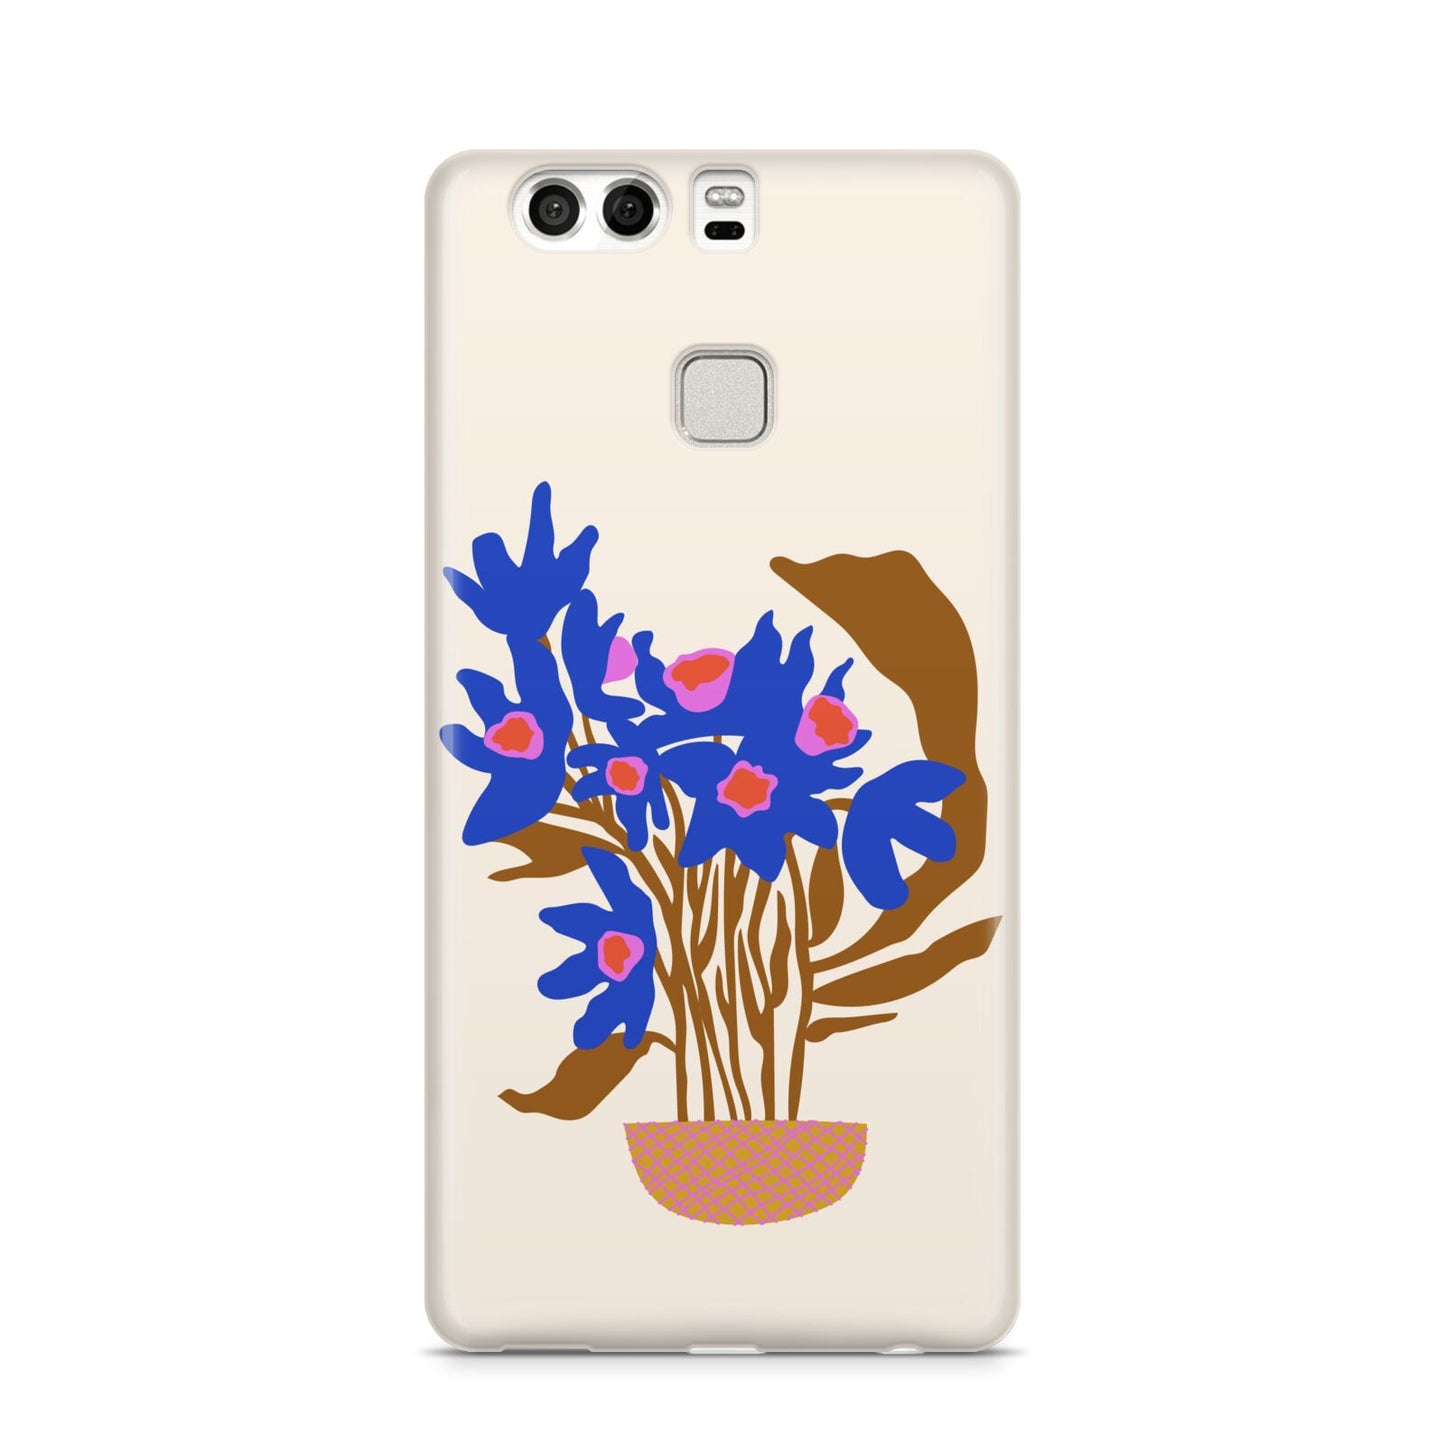 Flowers in a Vase Huawei P9 Case